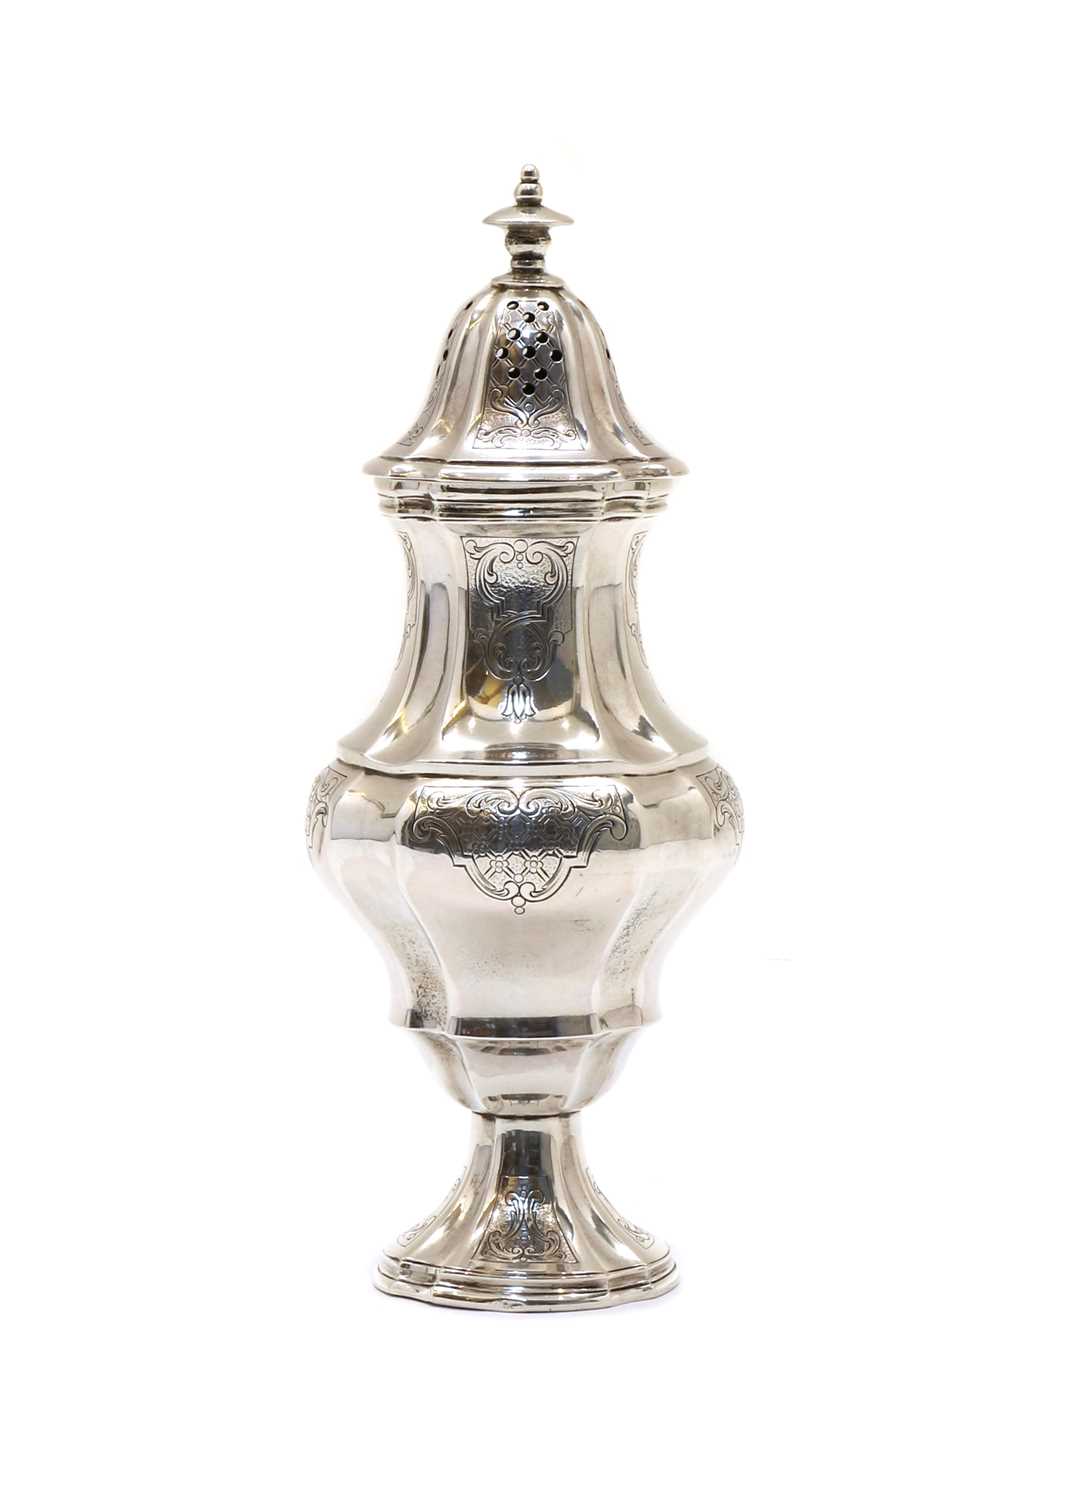 Lot 9 - An antique continental silver caster